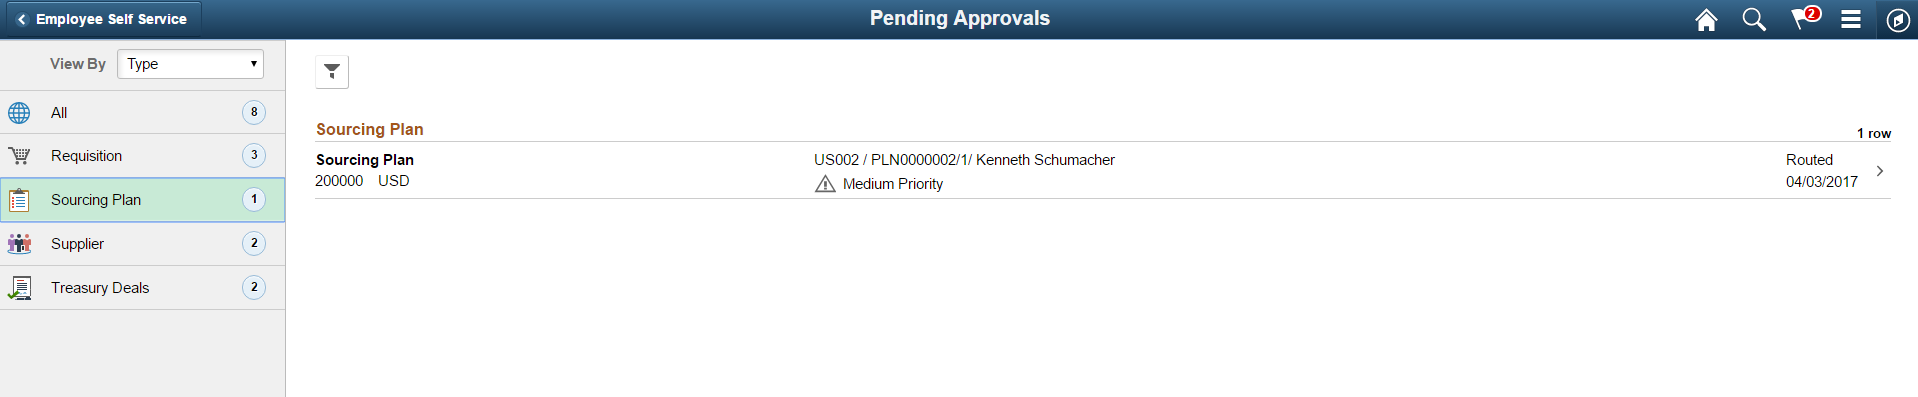 Pending Approvals - Sourcing Plans Page (List)